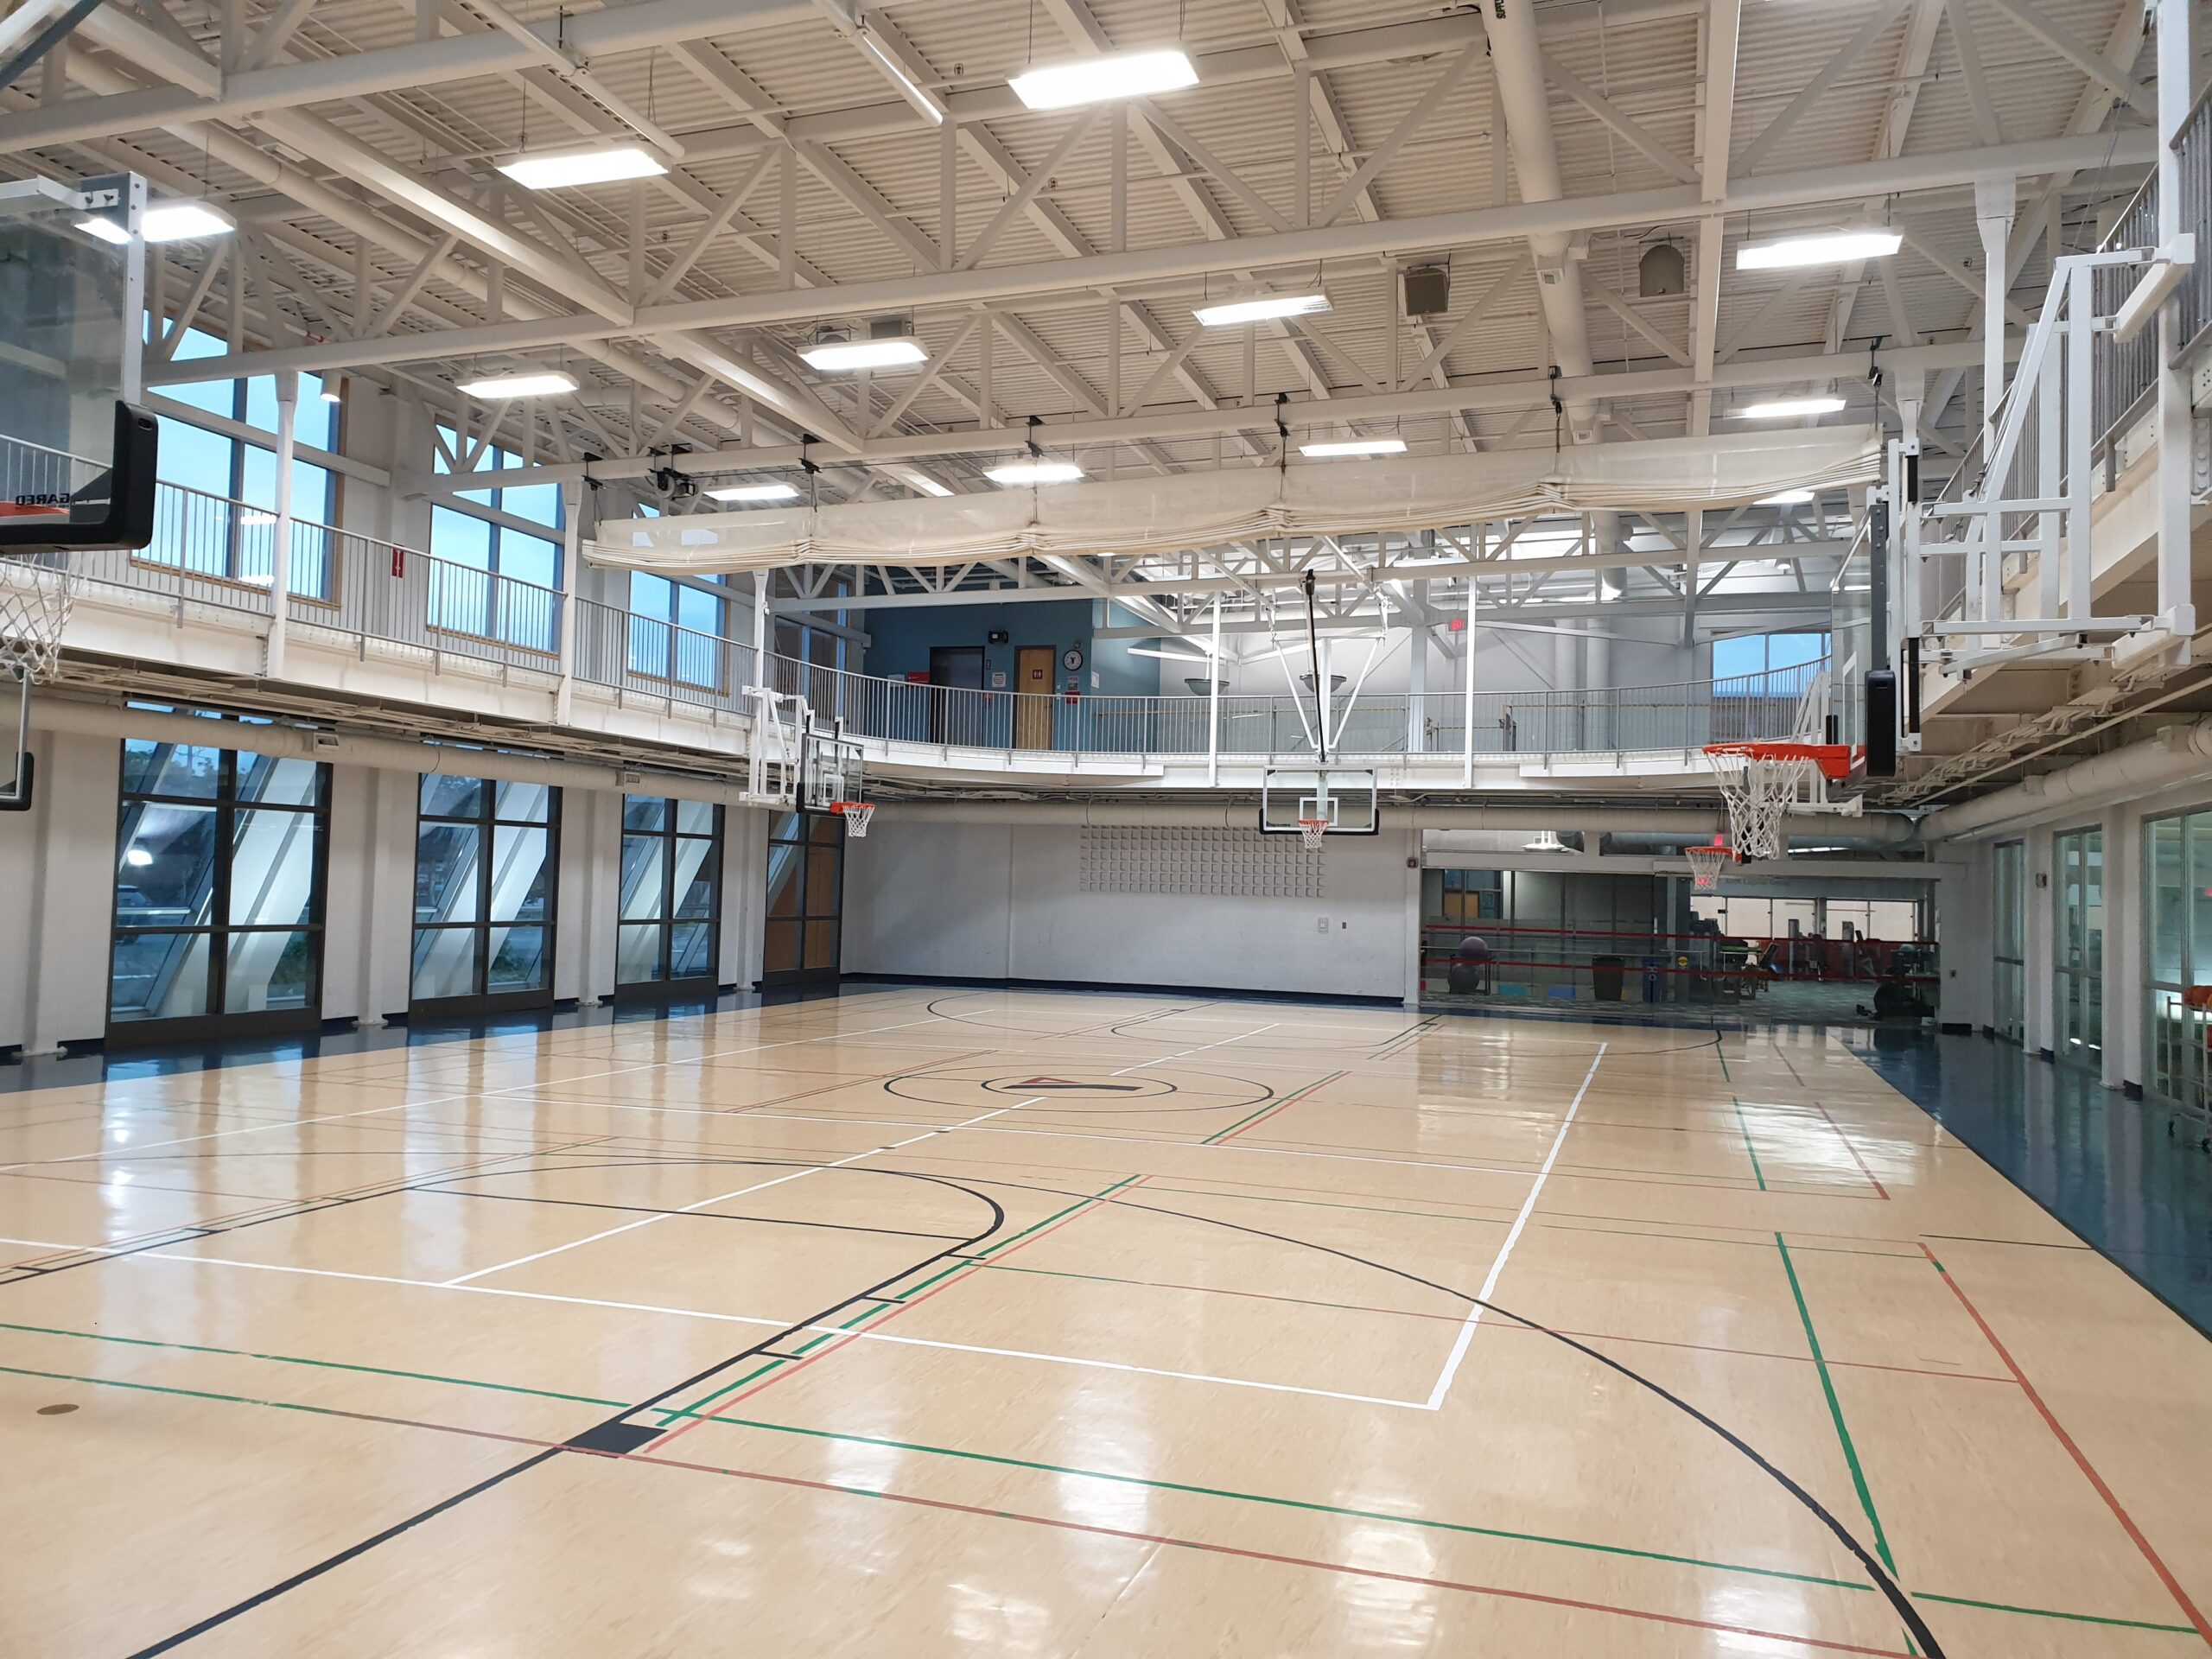 A gymnasium with basketball nets below the walking track